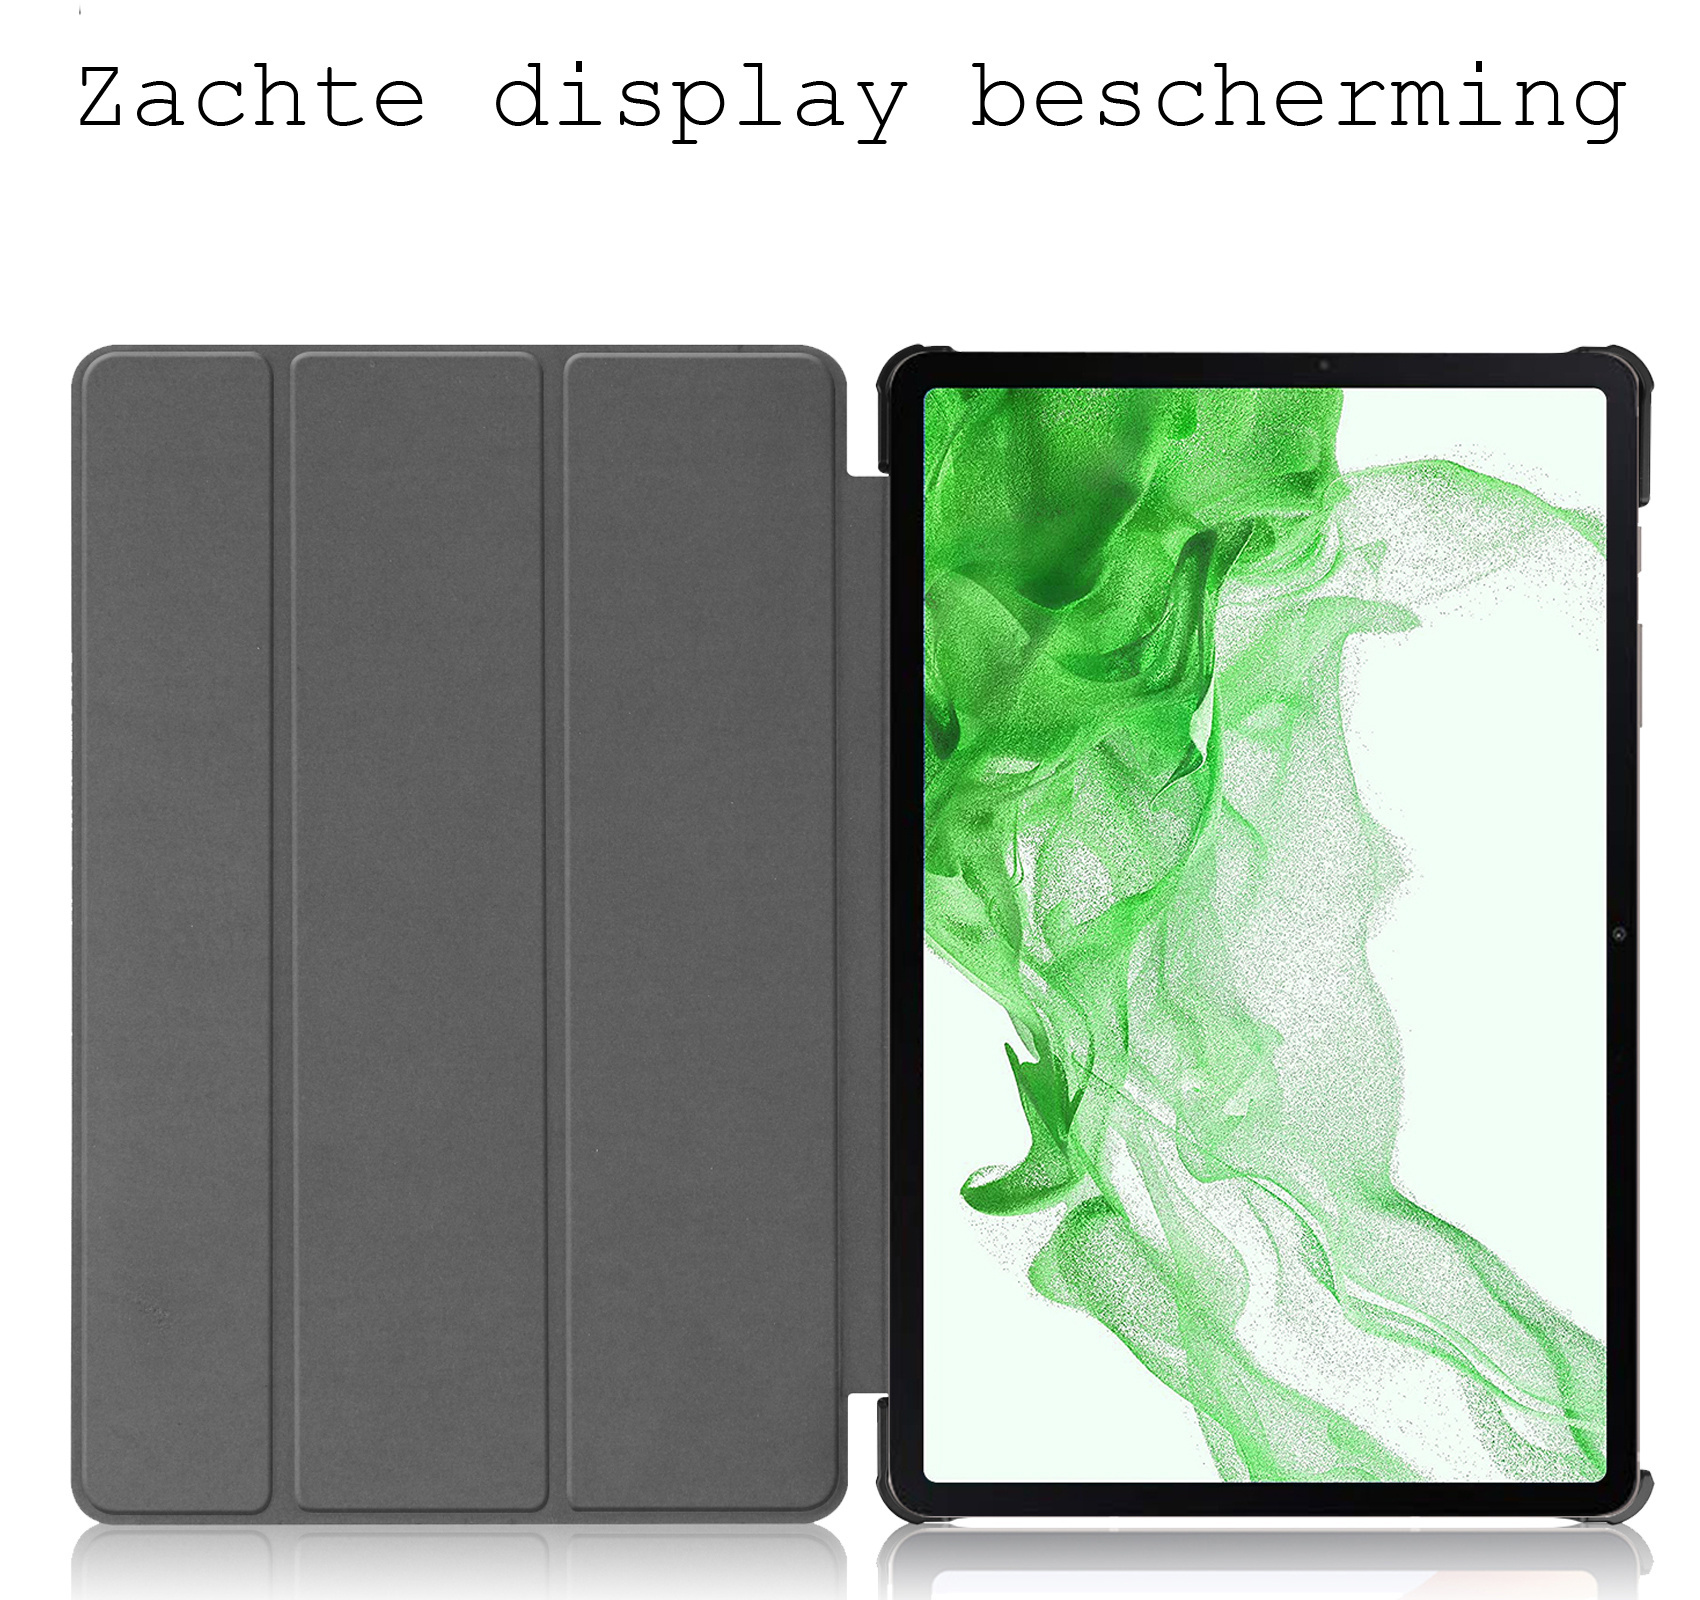 Hoesje Geschikt voor Samsung Galaxy Tab S8 Plus Hoes Case Tablet Hoesje Tri-fold Met Screenprotector - Hoes Geschikt voor Samsung Tab S8 Plus Hoesje Hard Cover Bookcase Hoes - Don't Touch Me